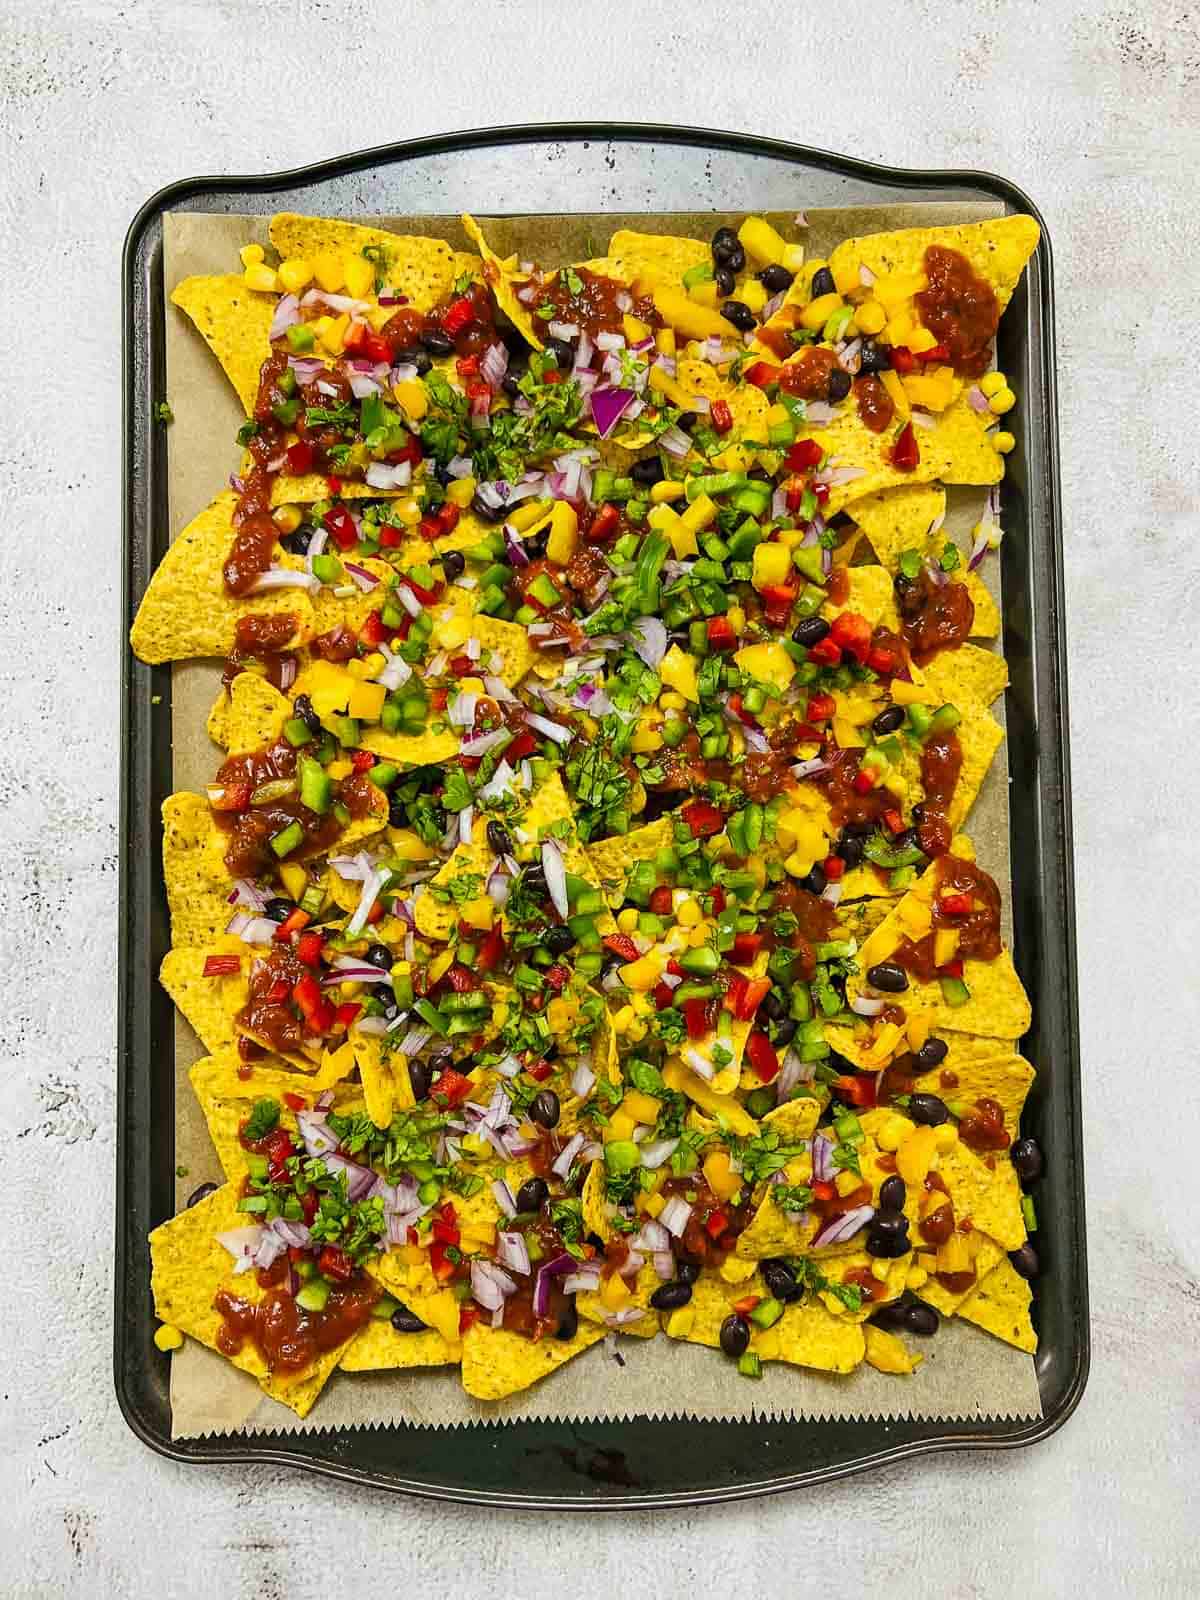 Chopped veggies and salsa added as toppings on nachos.